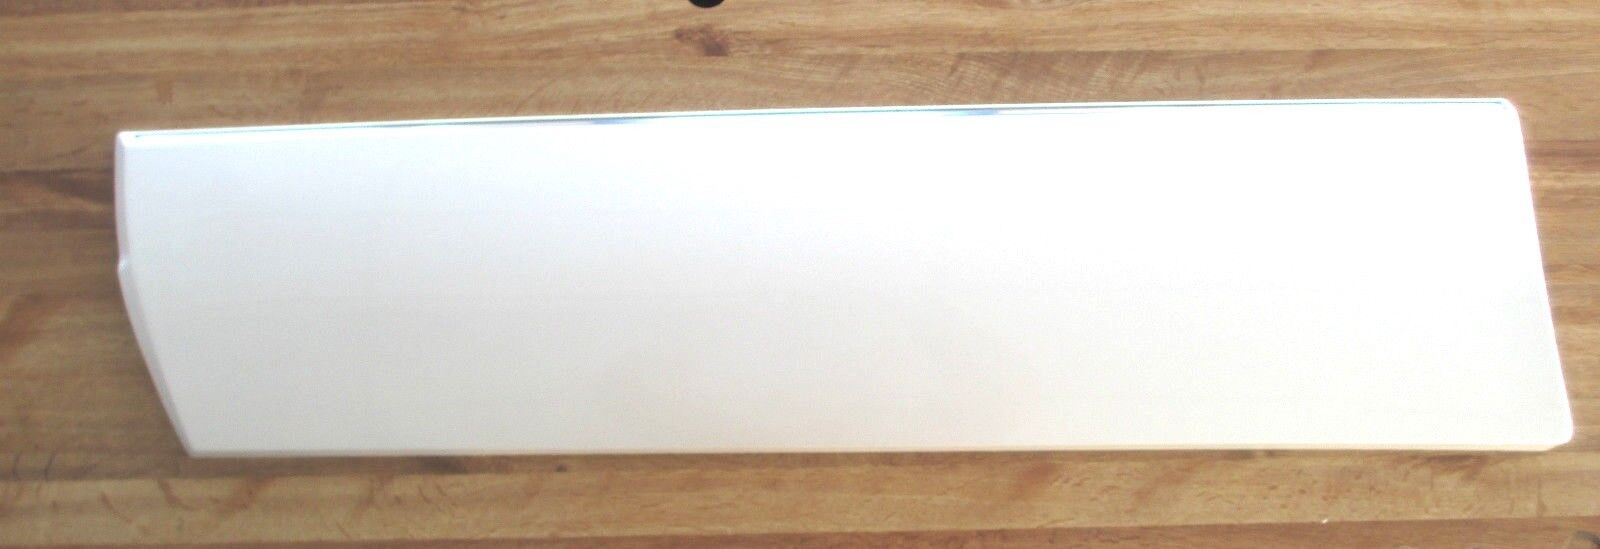 1992-93 CADILLAC SEVILLE LH FRONT LOWER DOOR MOLDING WHITE DIAMOND